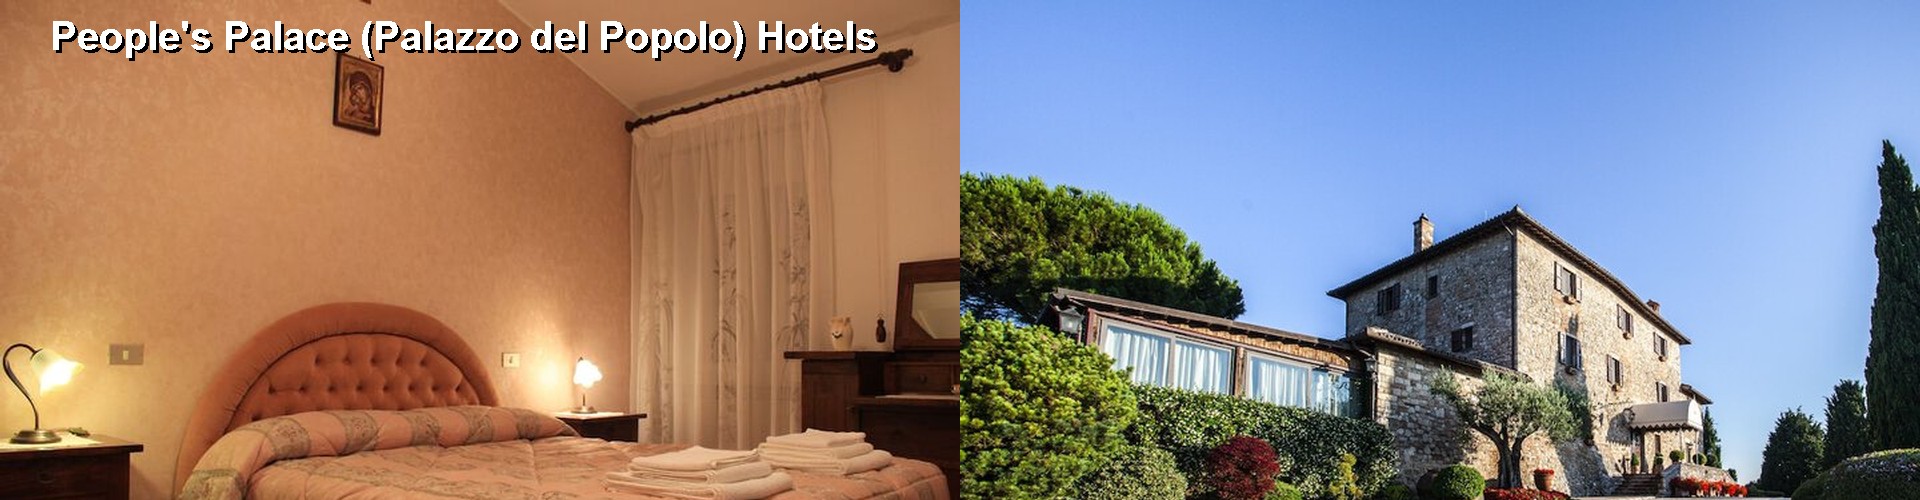 5 Best Hotels near People's Palace (Palazzo del Popolo)